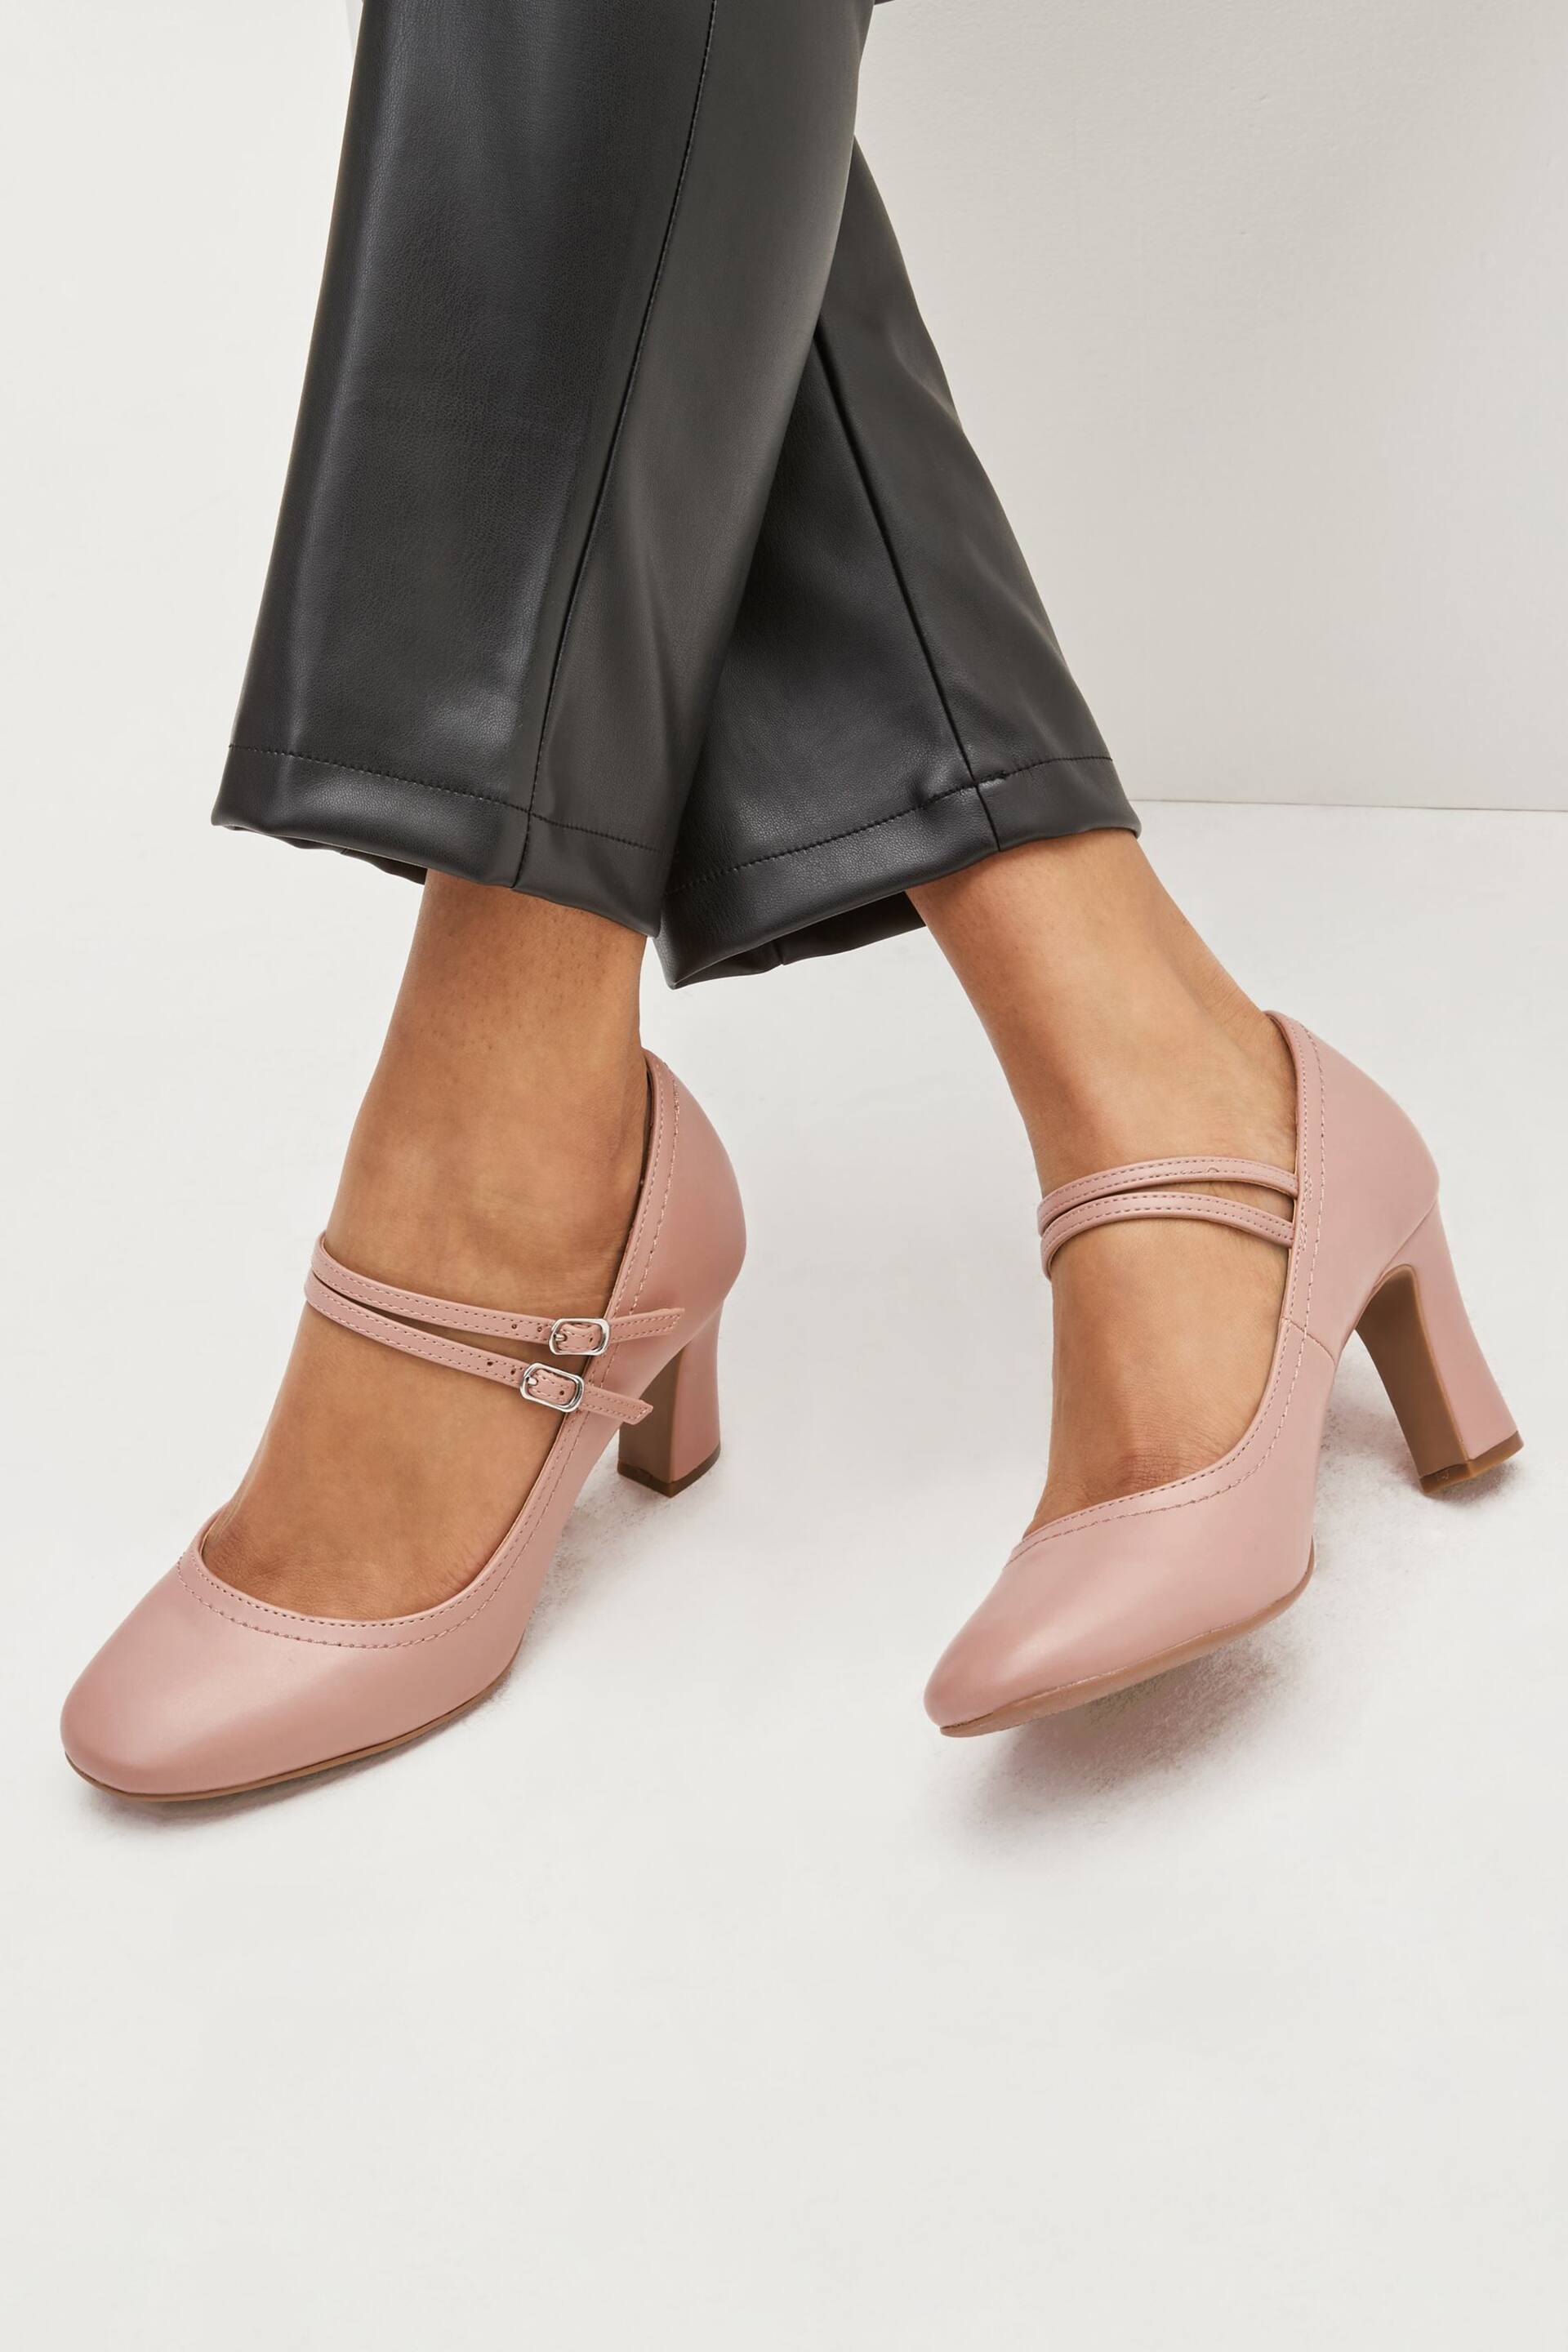 Nude Pink Regular/Wide Fit Forever Comfort® Mary Jane Shoes - Image 1 of 6